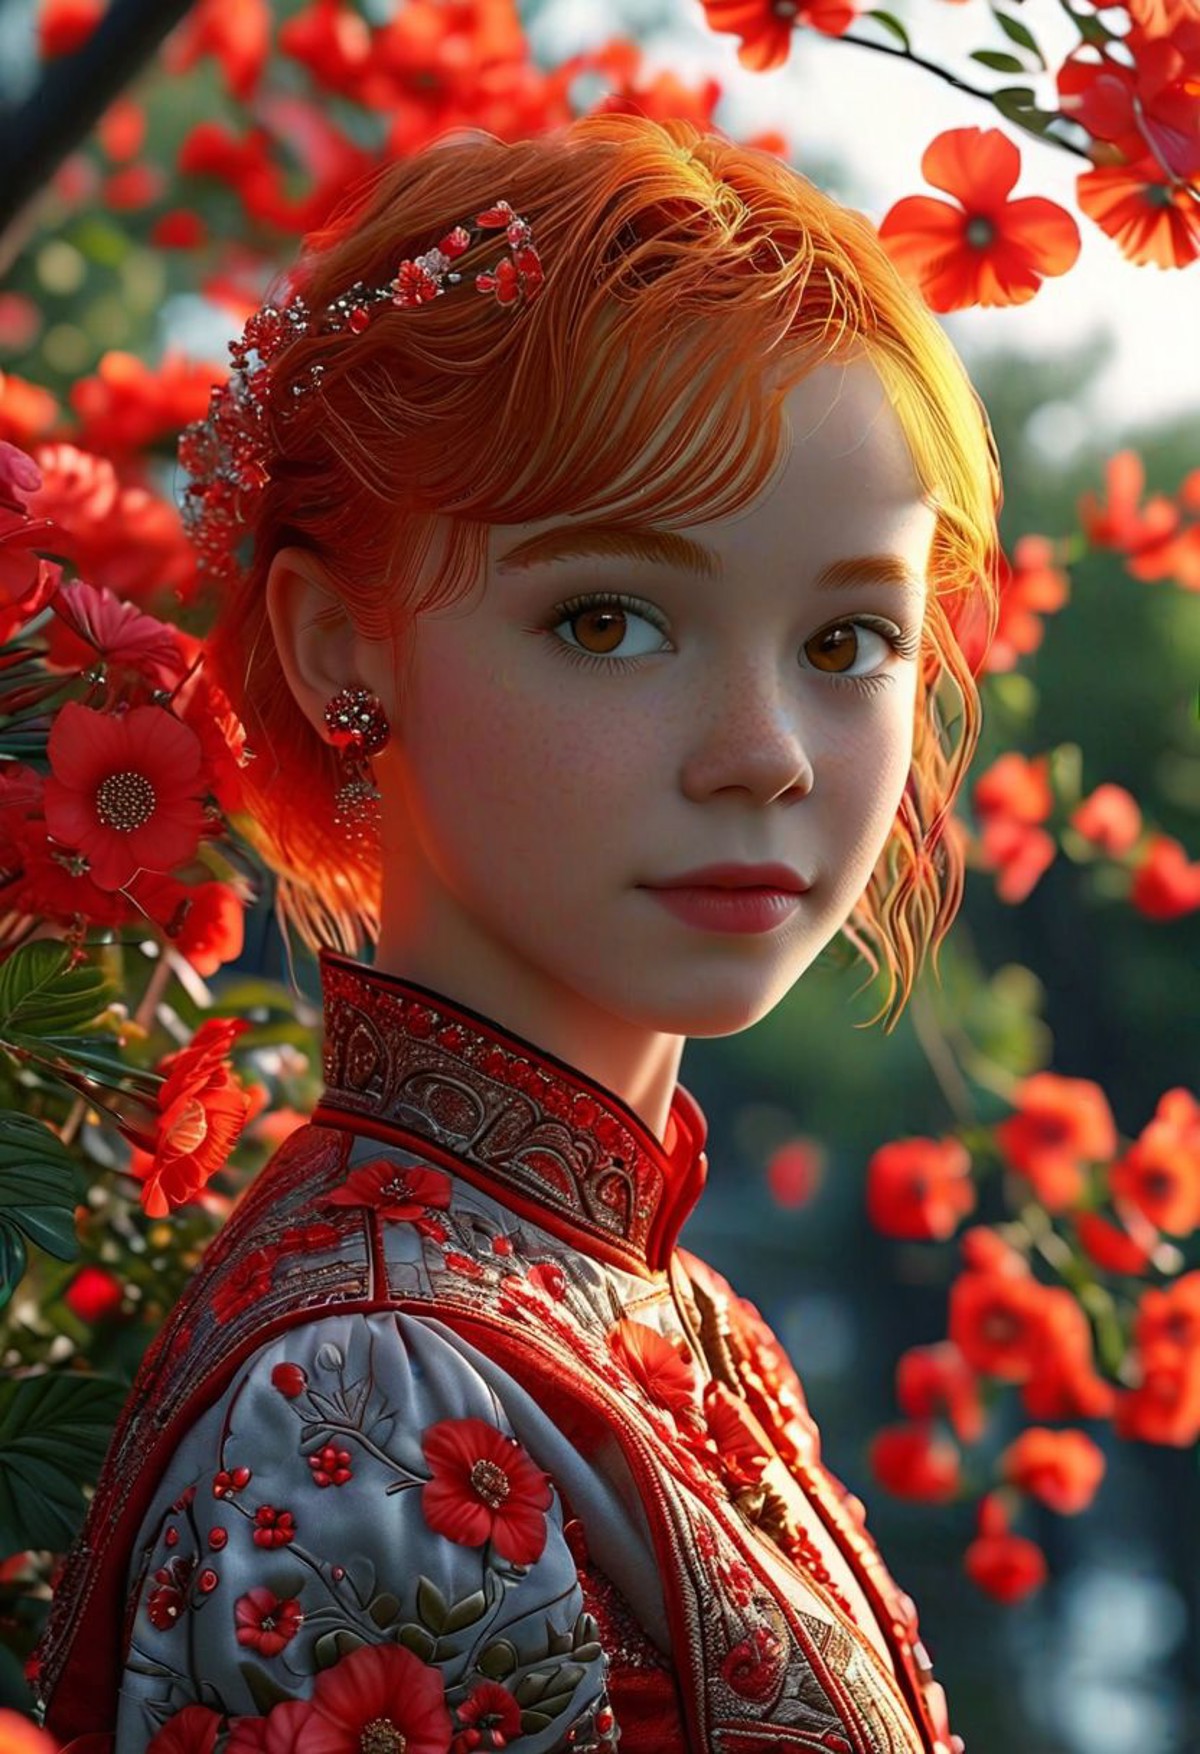 professional 3d model portrait, cute magic_girl, ginger cut hair with red flowers, brown ideal eyes, looks from behind the...